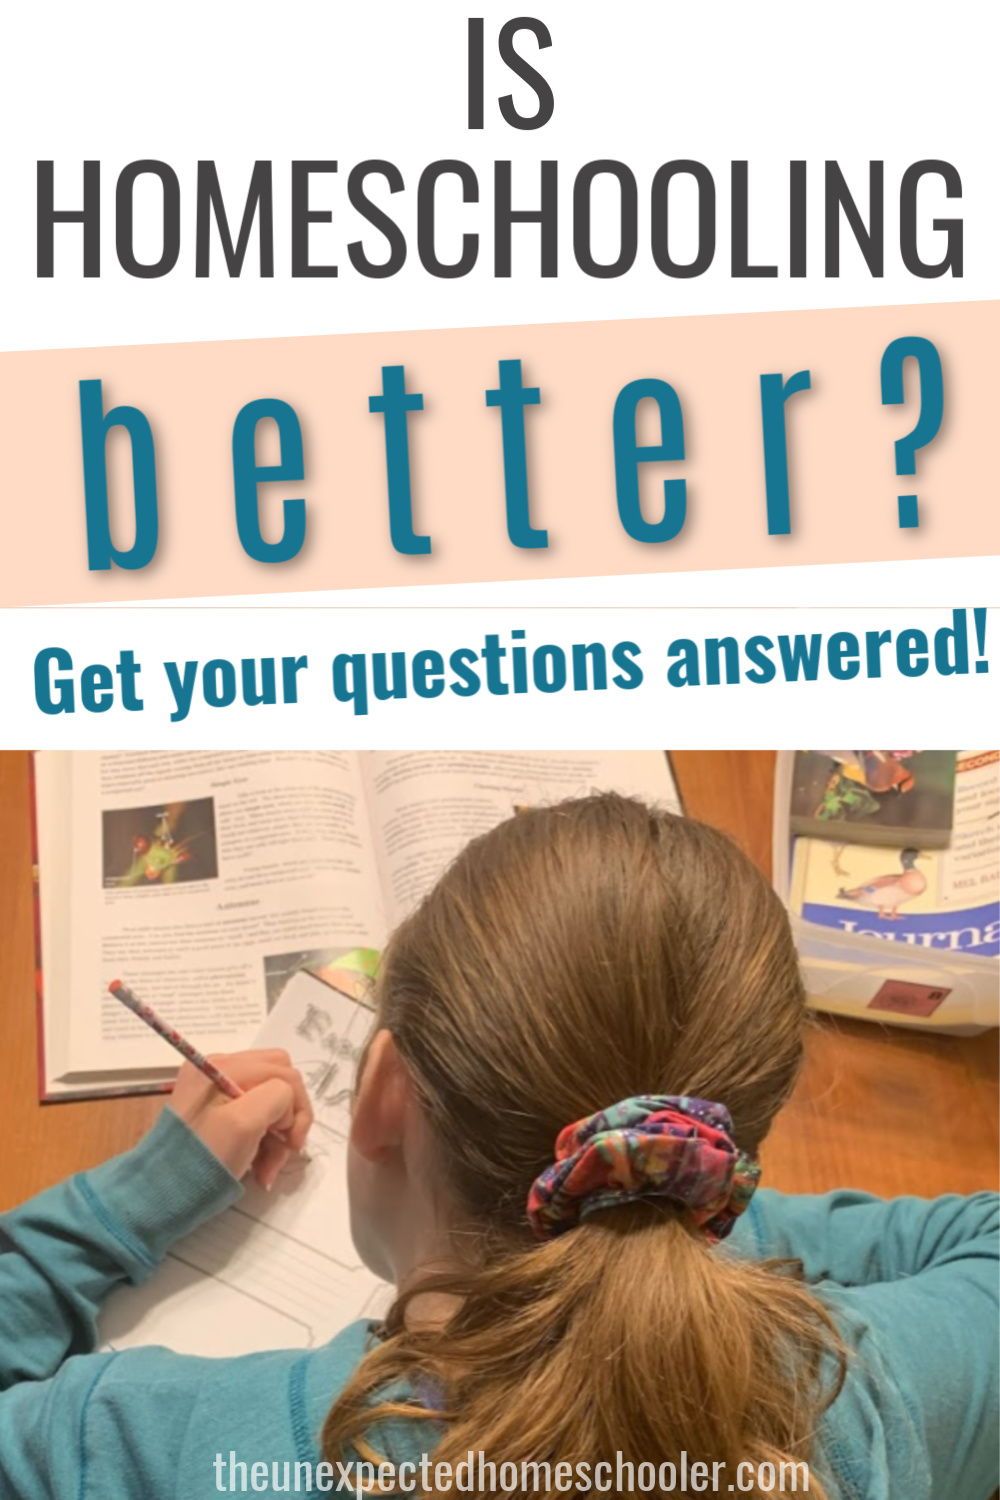 Is Homeschooling Better for Your Struggling Child?